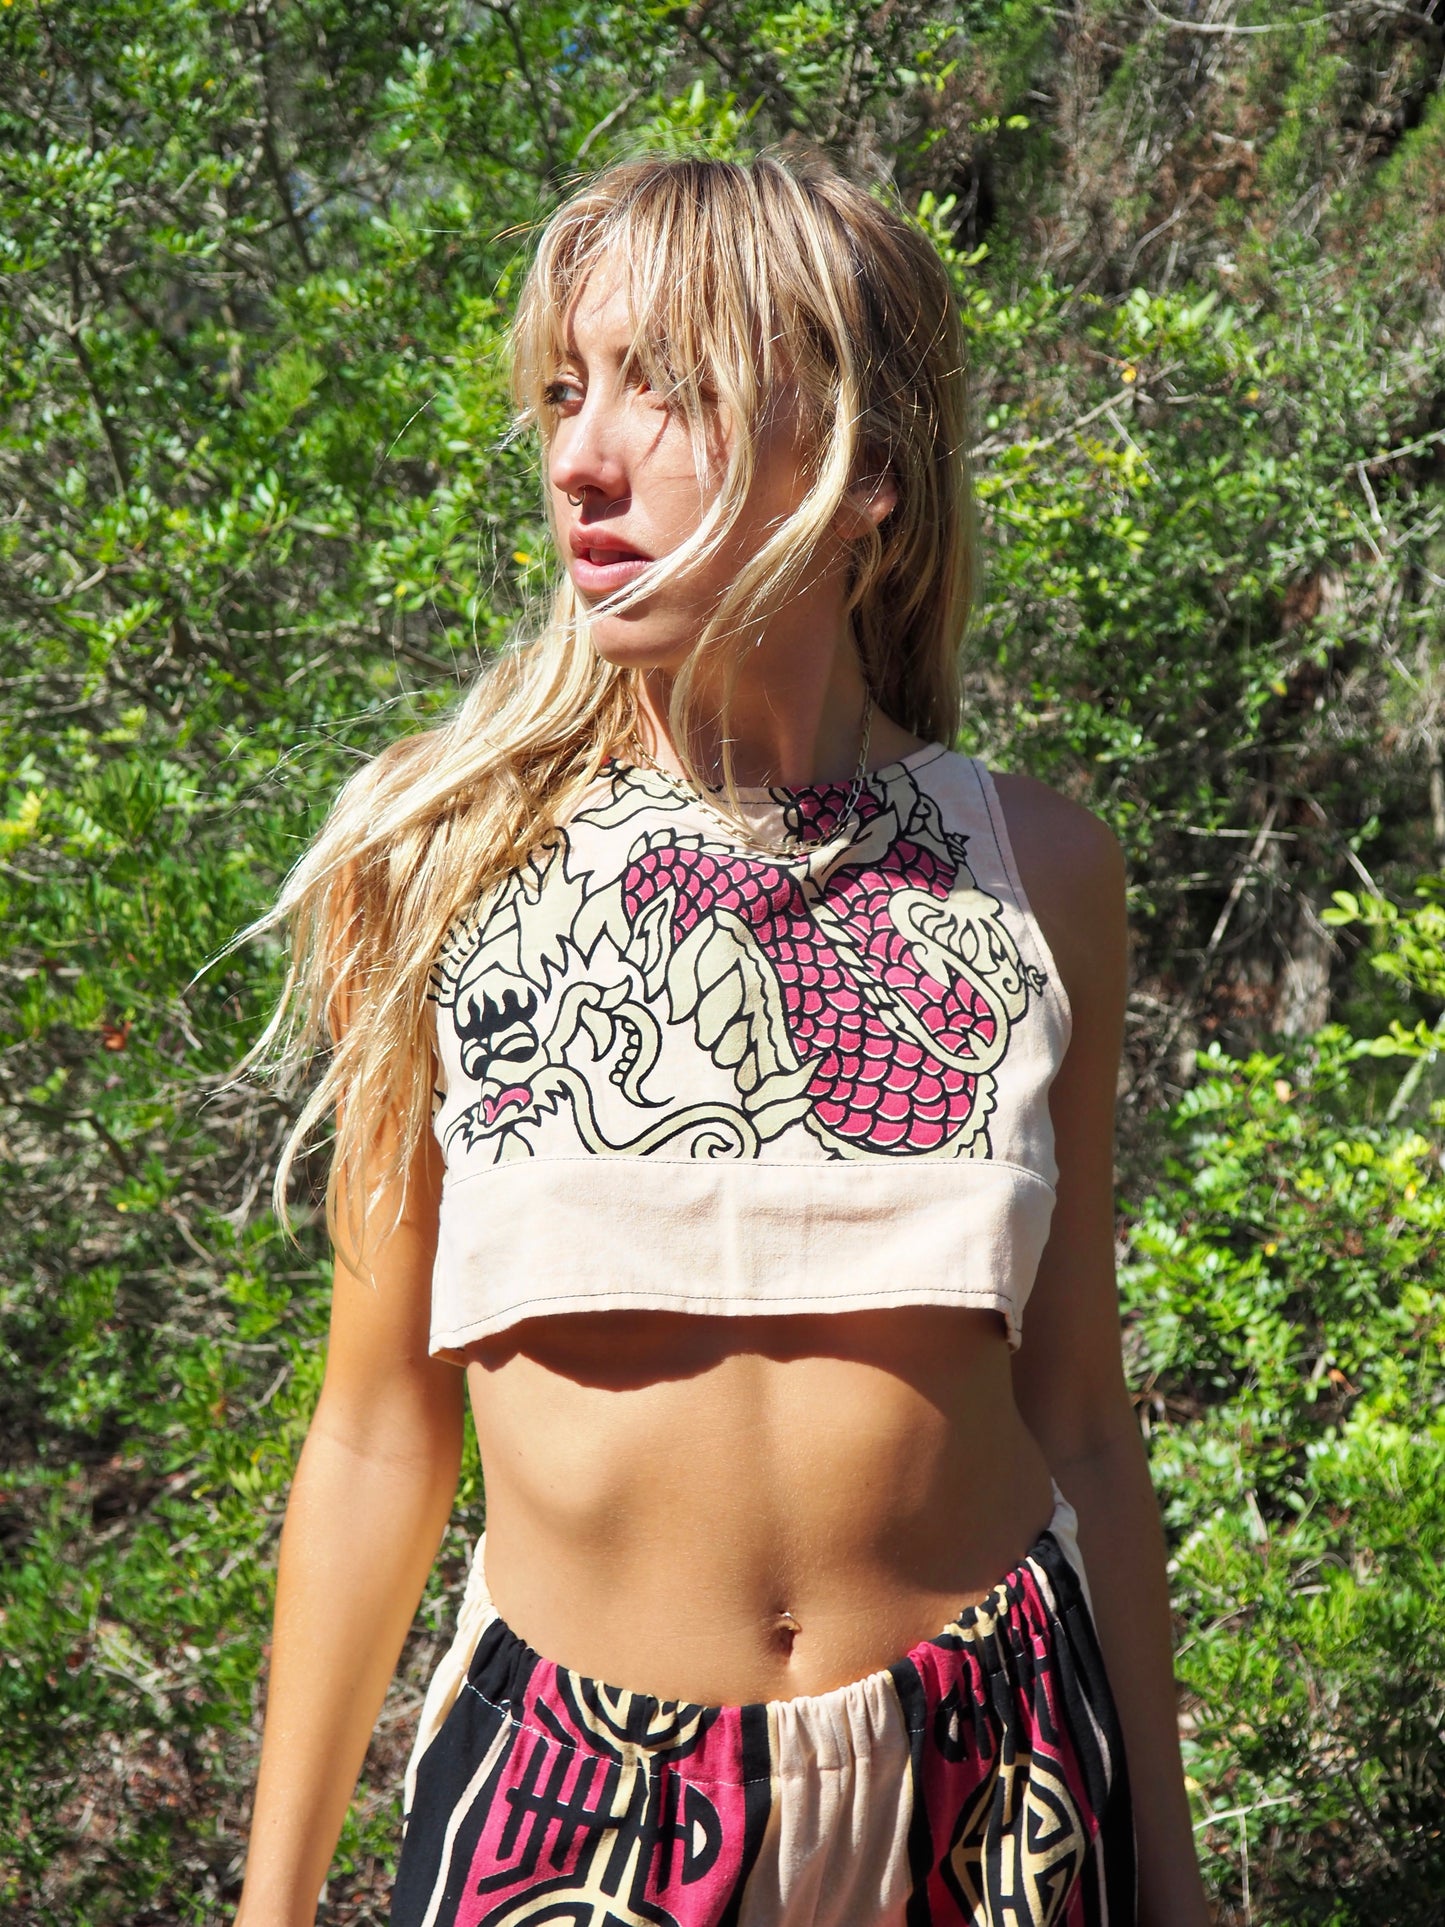 Up-cycled cotton Crop top only pants also available with dragon design by Vagabond Ibiza made